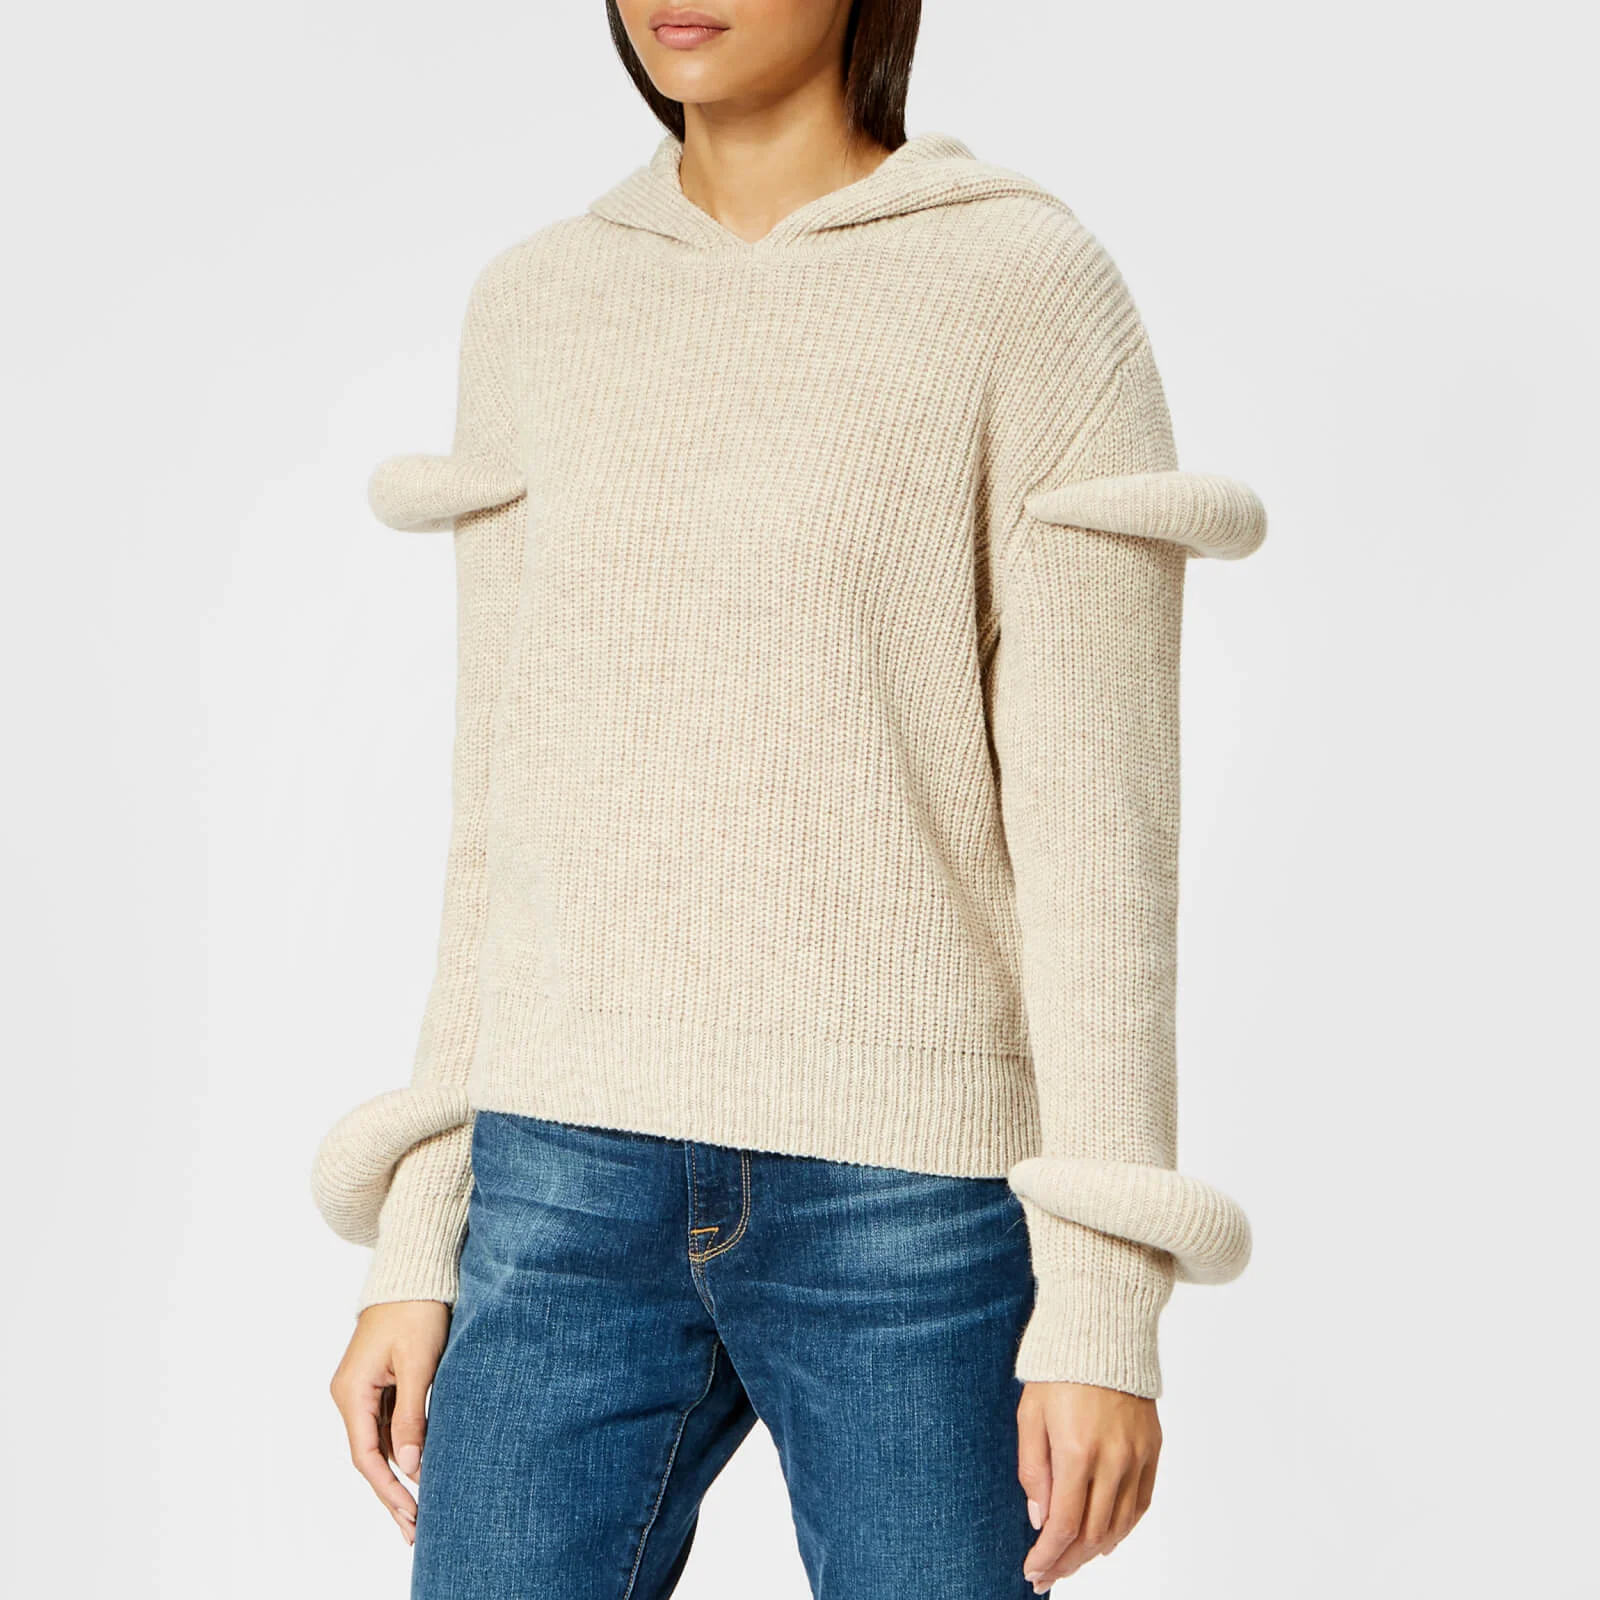 JW Anderson Women's Rib Knitted Hoody with Sleeves Puff - Desert Image 1